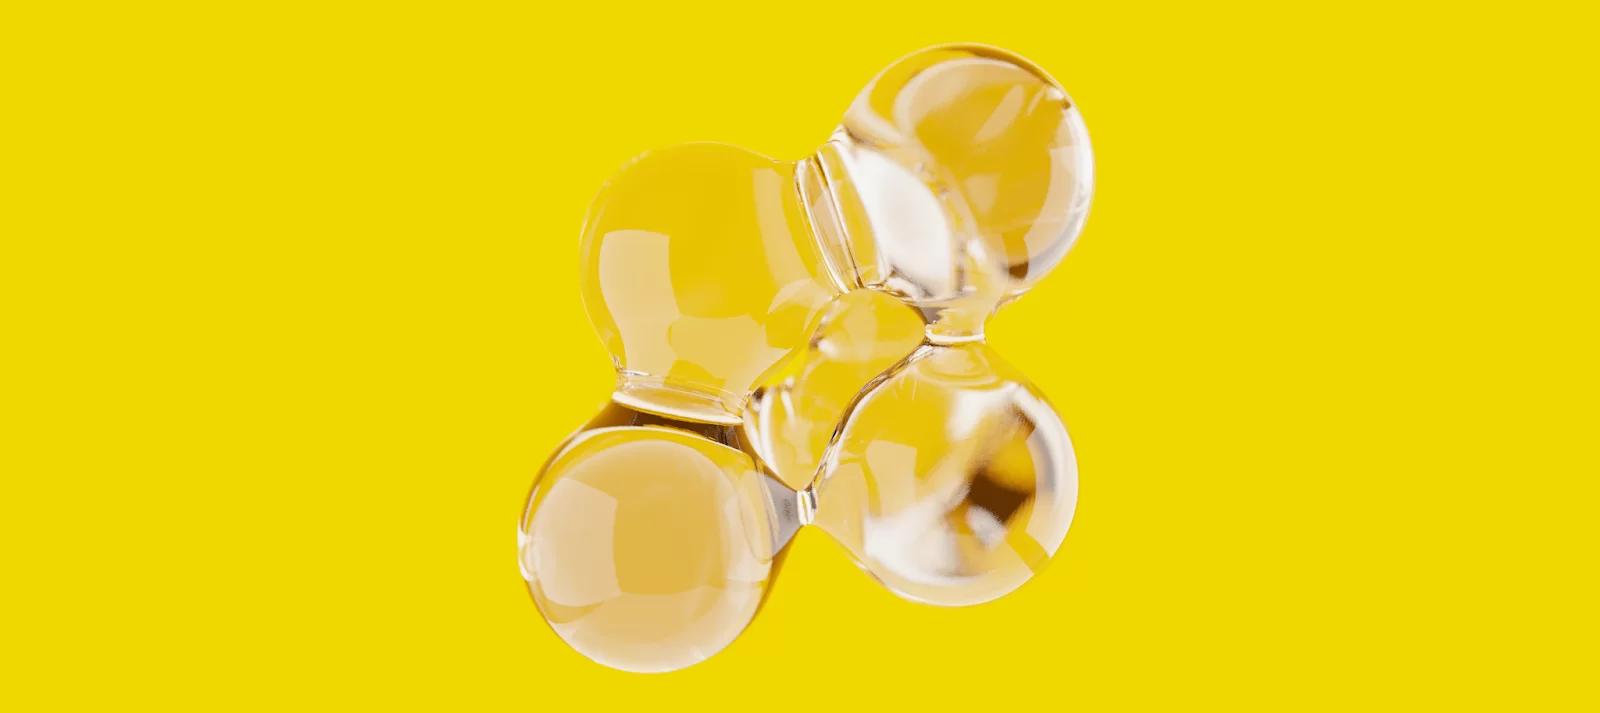 Abstract transparent glass object on yellow background